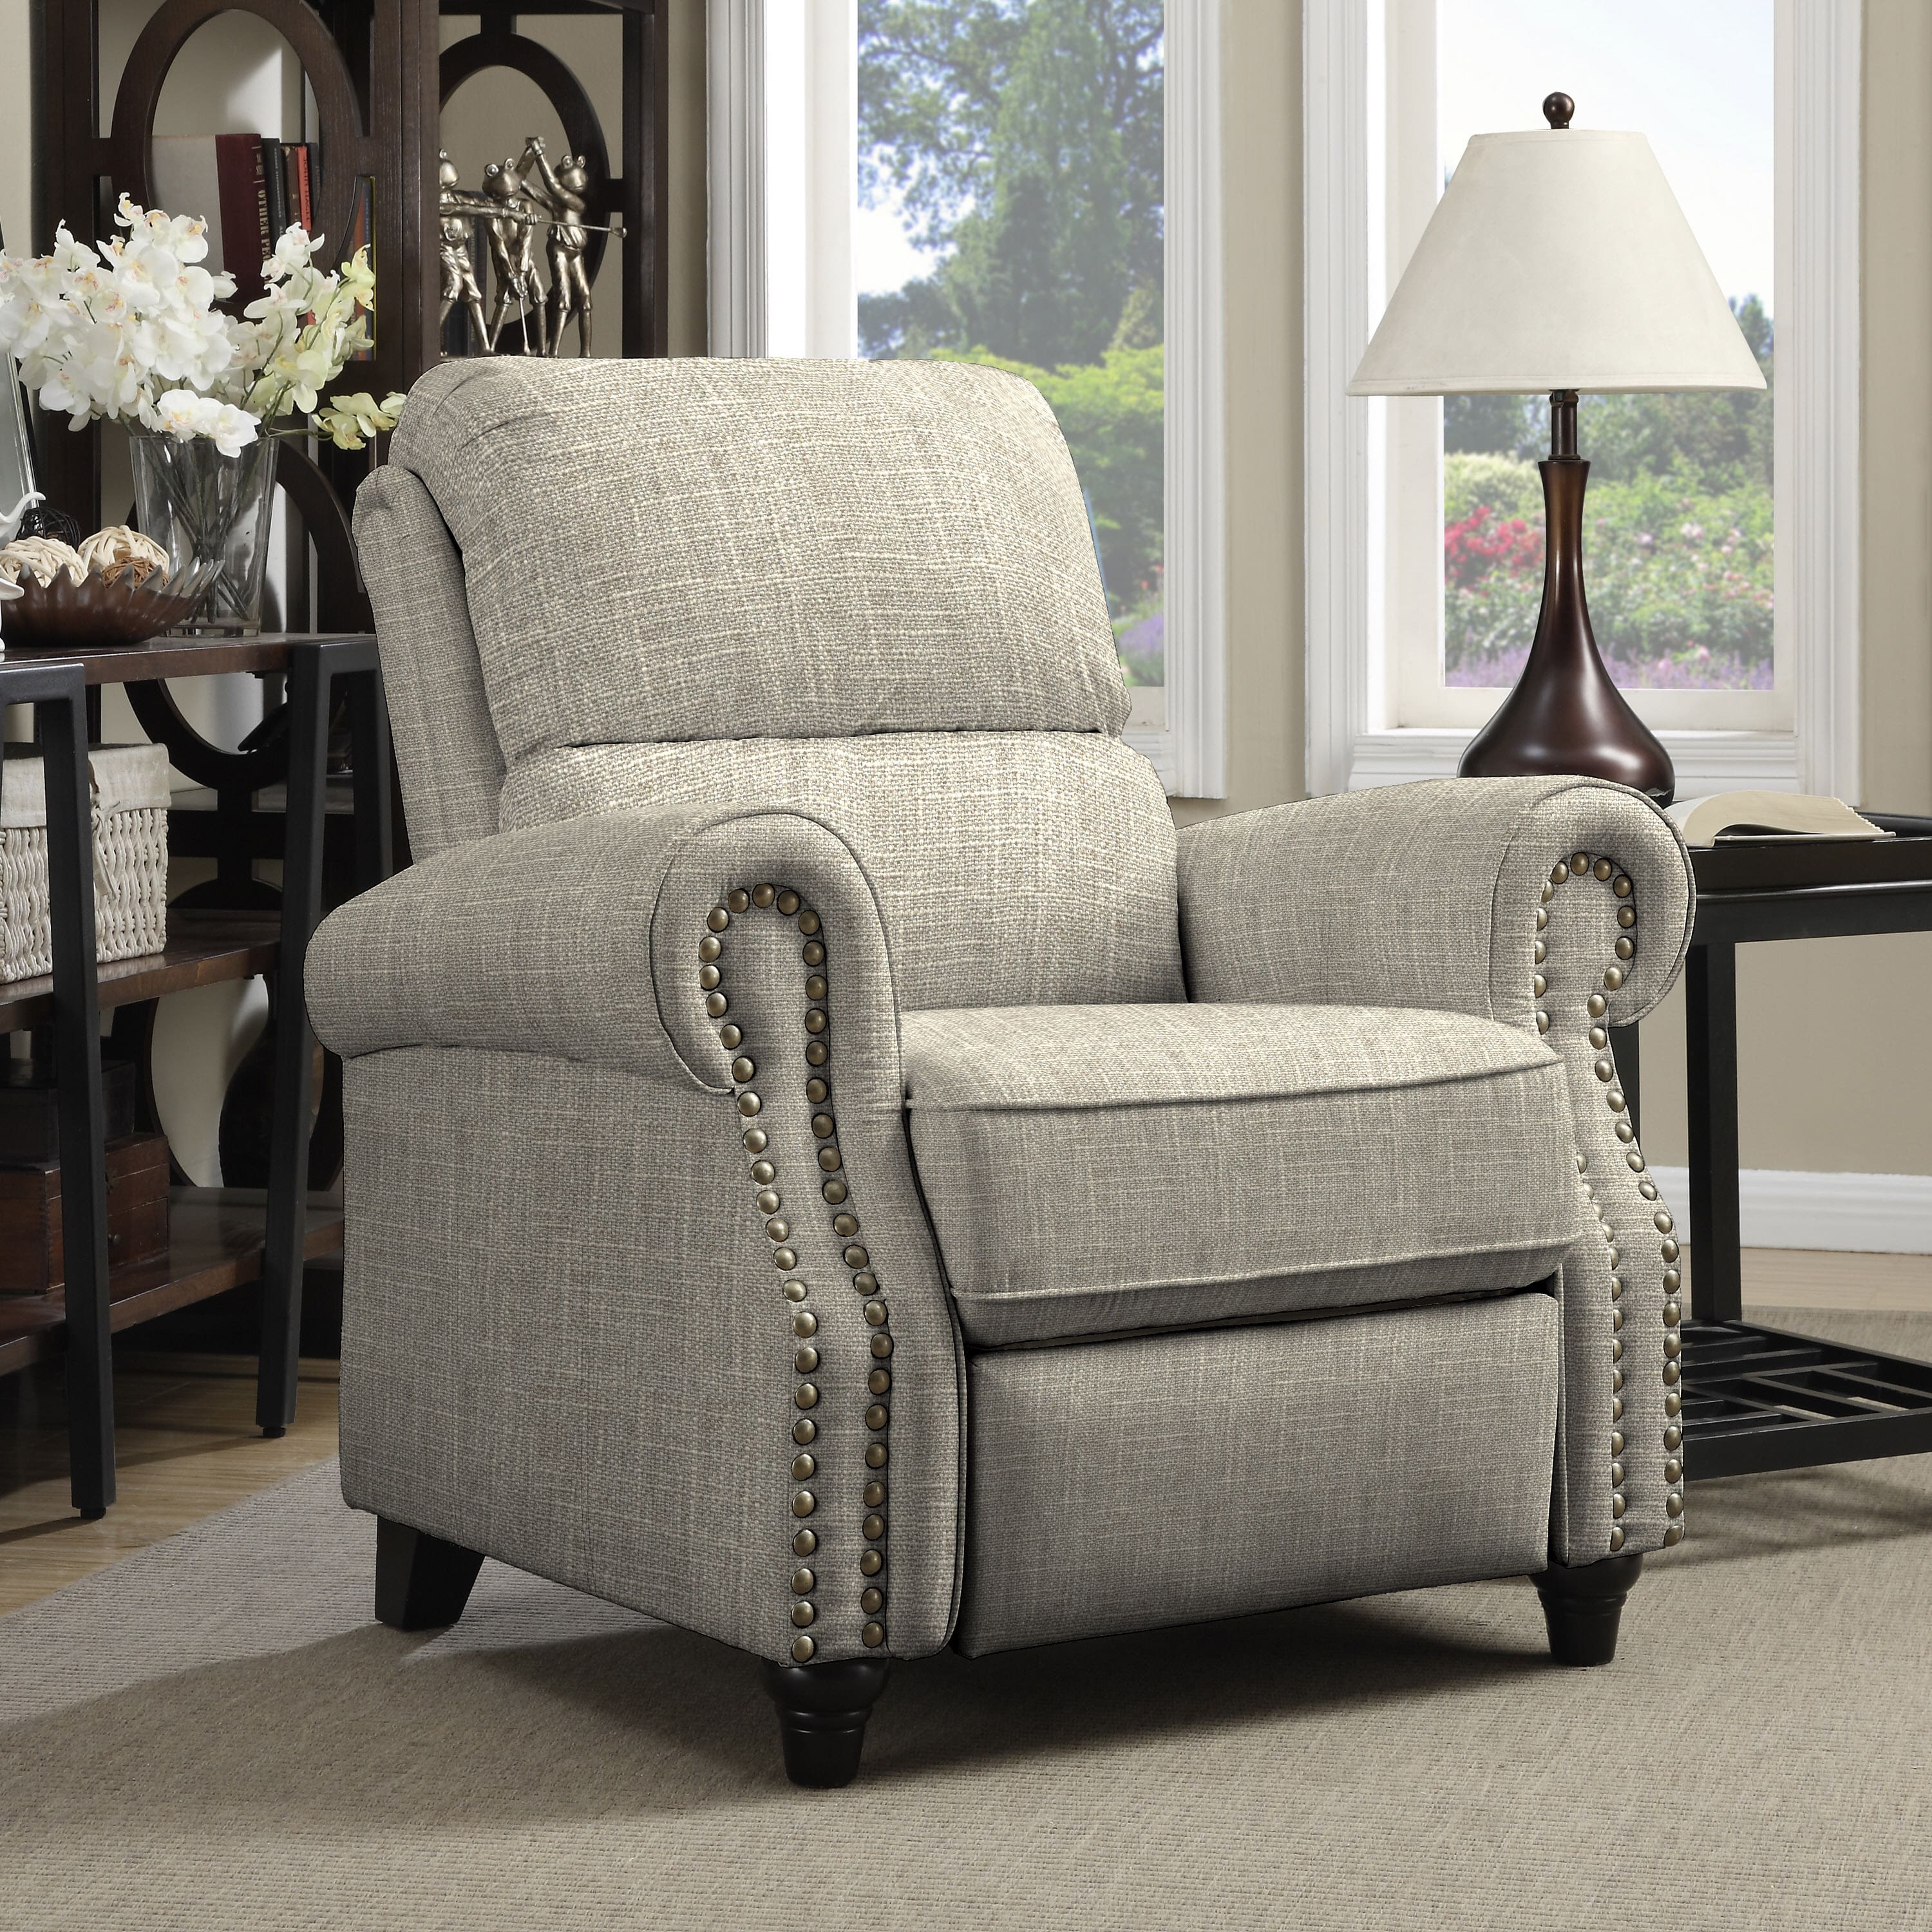 Recliner Chairs & Rocking Recliners For Less | Overstock